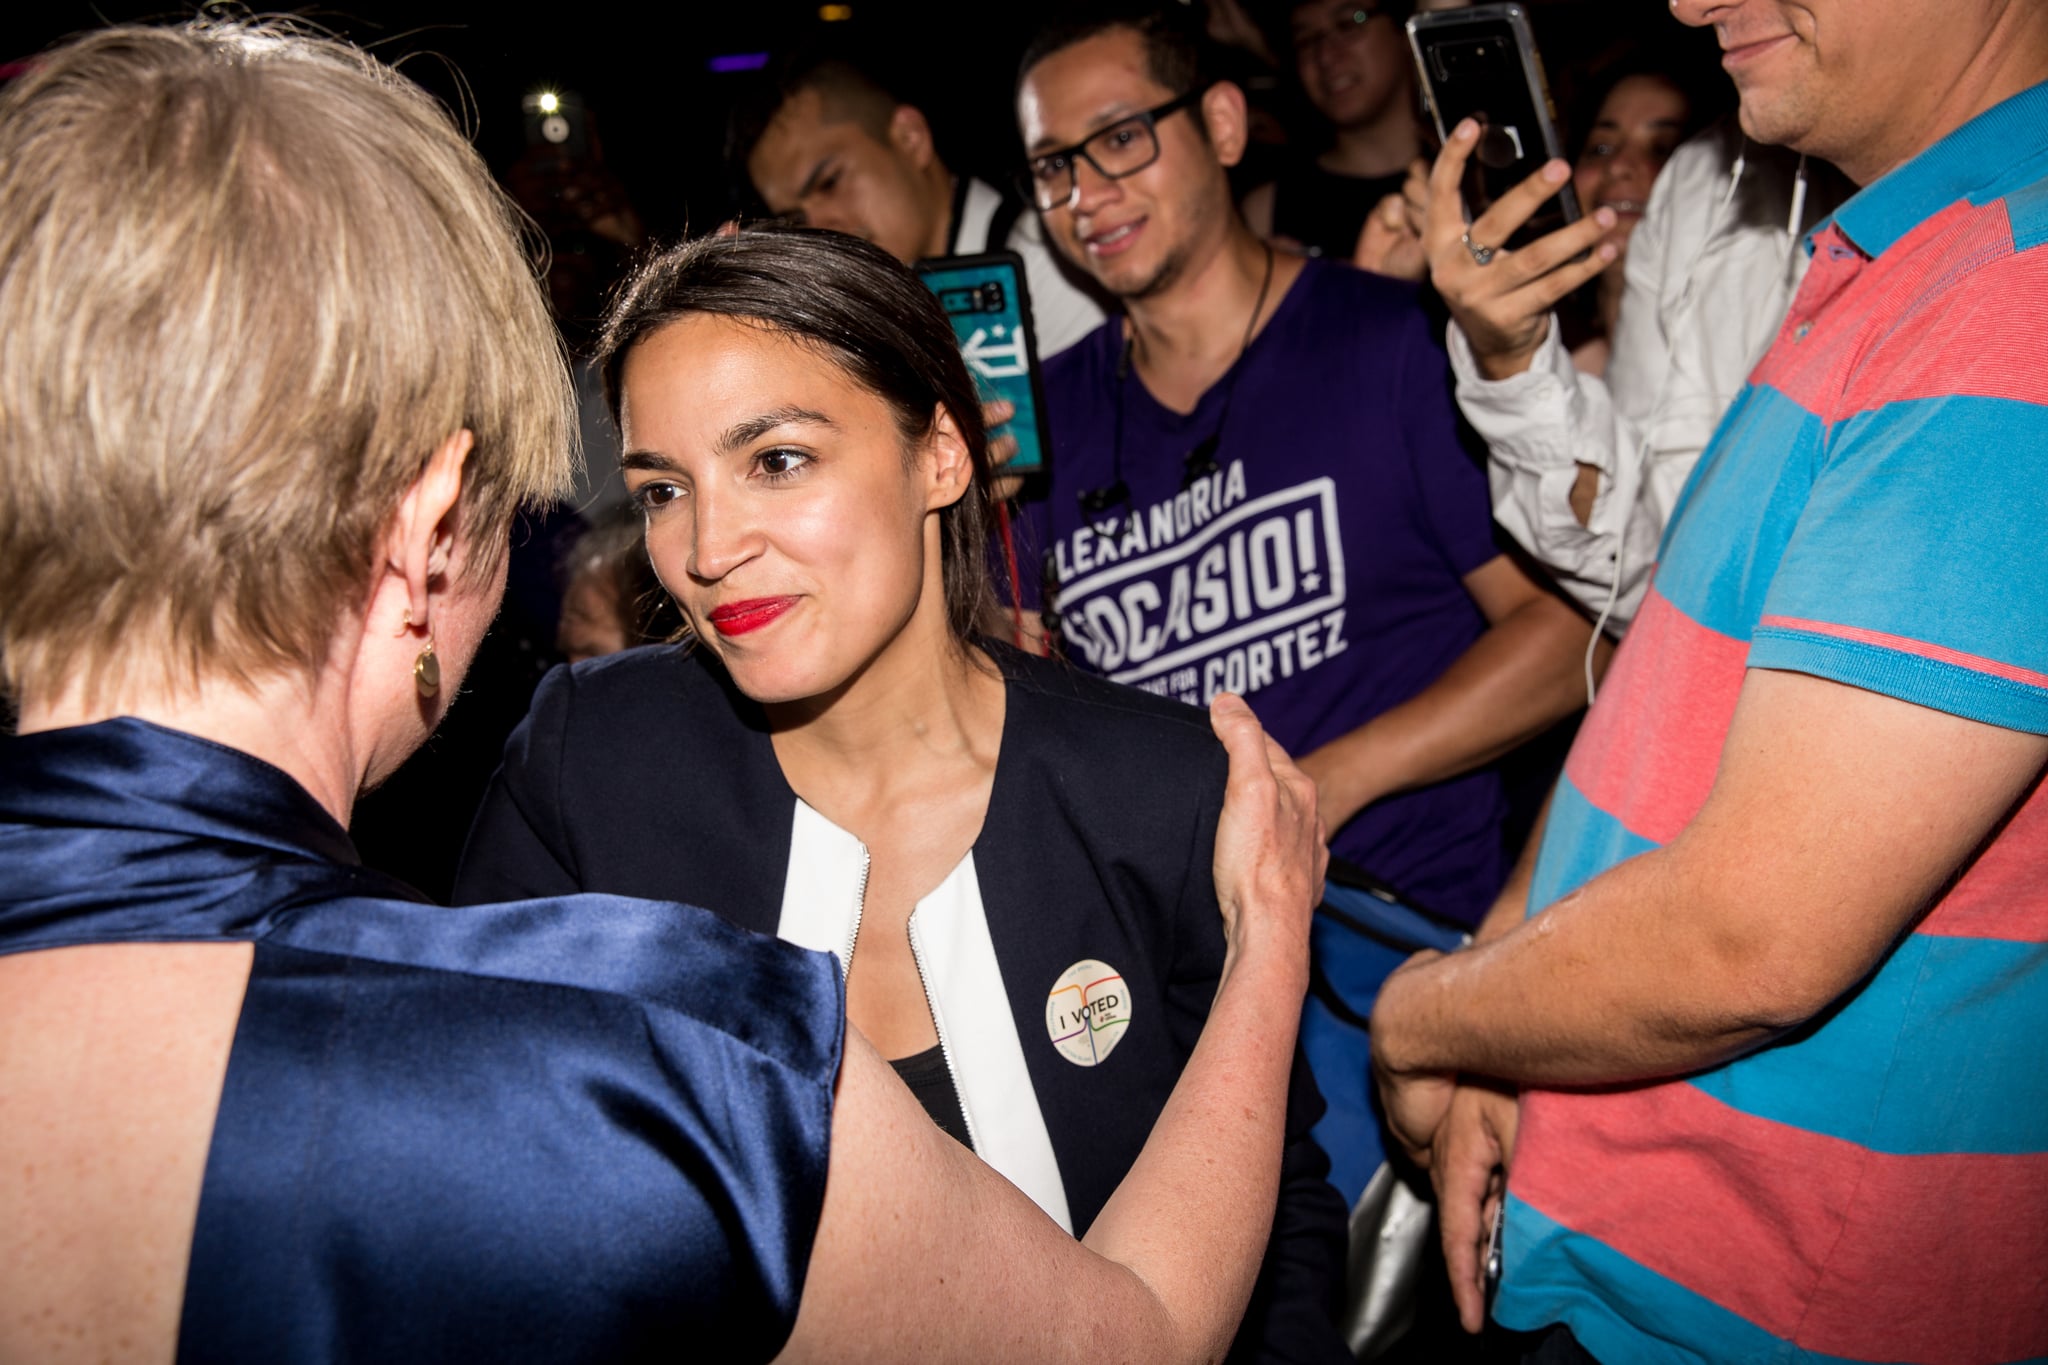 NEW YORK, NY - JUNE 26: Progressive challenger Alexandria Ocasio-Cortez embraces New York gubenatorial candidate Cynthia Nixon at her victory party in the Bronx after upsetting incumbent Democratic Representative Joseph Crowly on June 26, 2018 in New York City. Ocasio-Cortez upset Rep. Joseph Crowley in New York's 14th Congressional District, which includes parts of the Bronx and Queens. (Photo by Scott Heins/Getty Images)